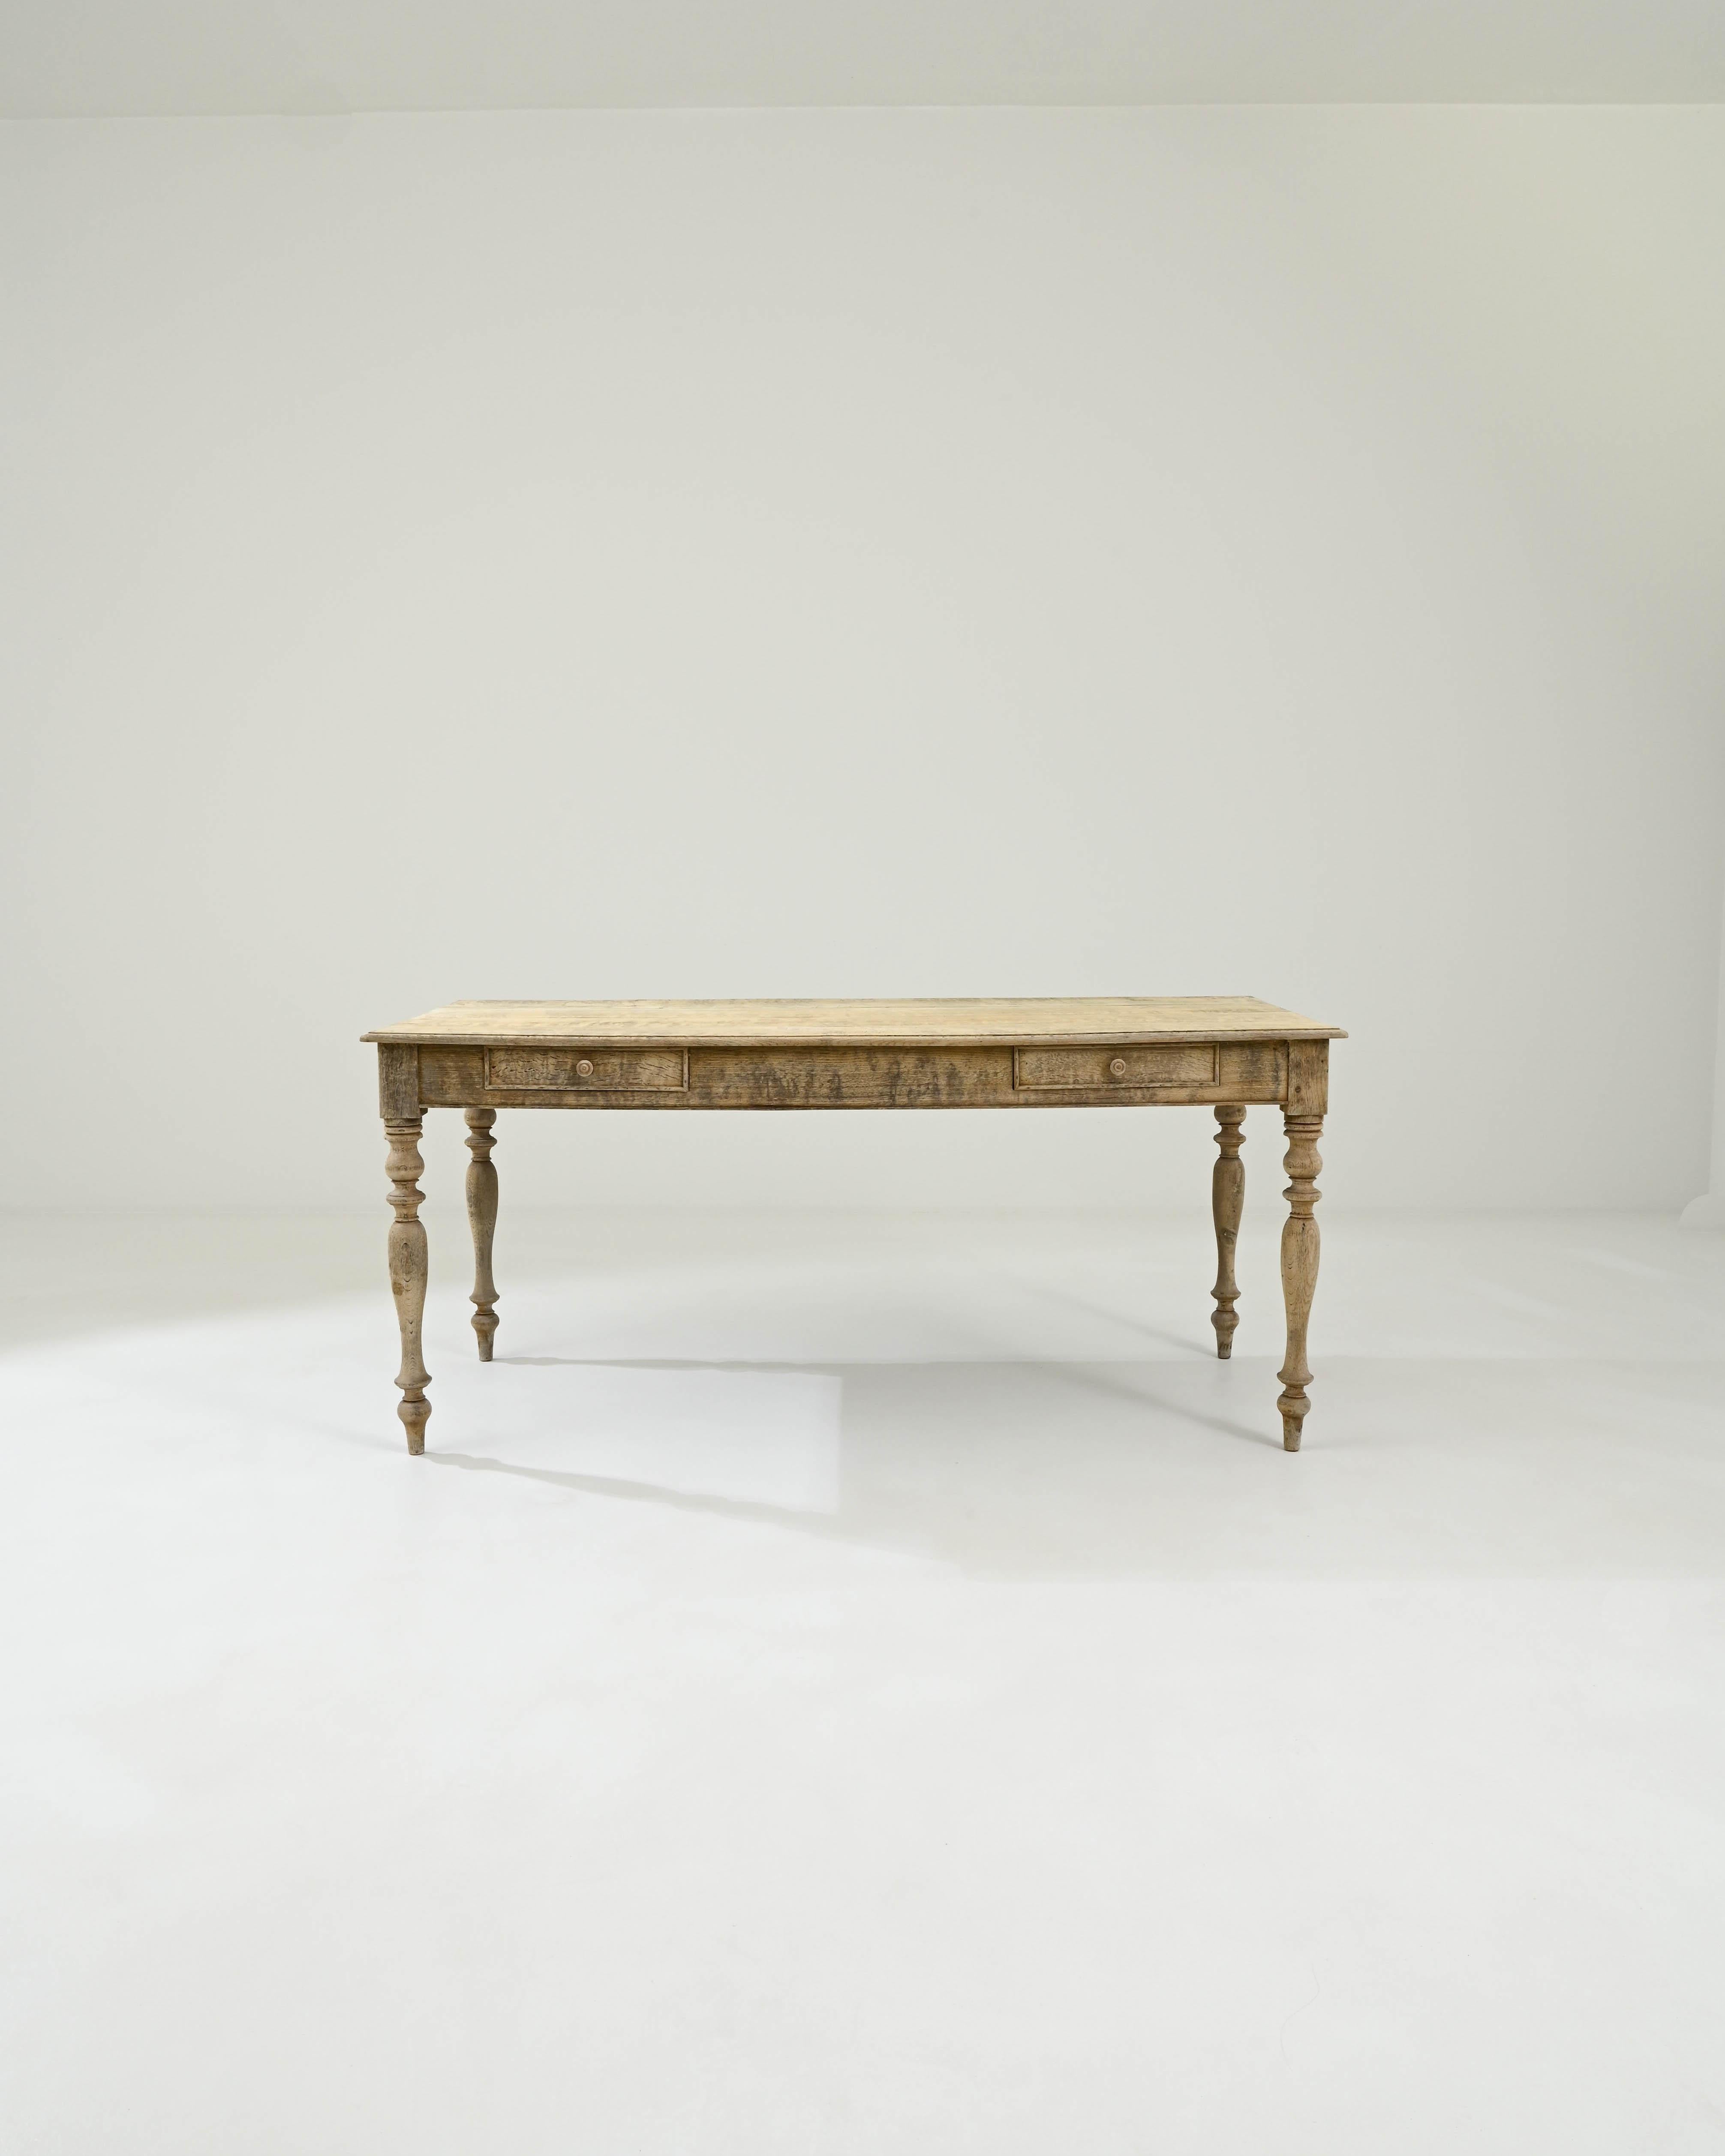 This elegant table was crafted in France, dating back to the 1900s. The simple tabletop rests upon hand-lathed legs, which contribute to a visually pleasing silhouette with their graceful geometric shapes. The large apron features two drawers with